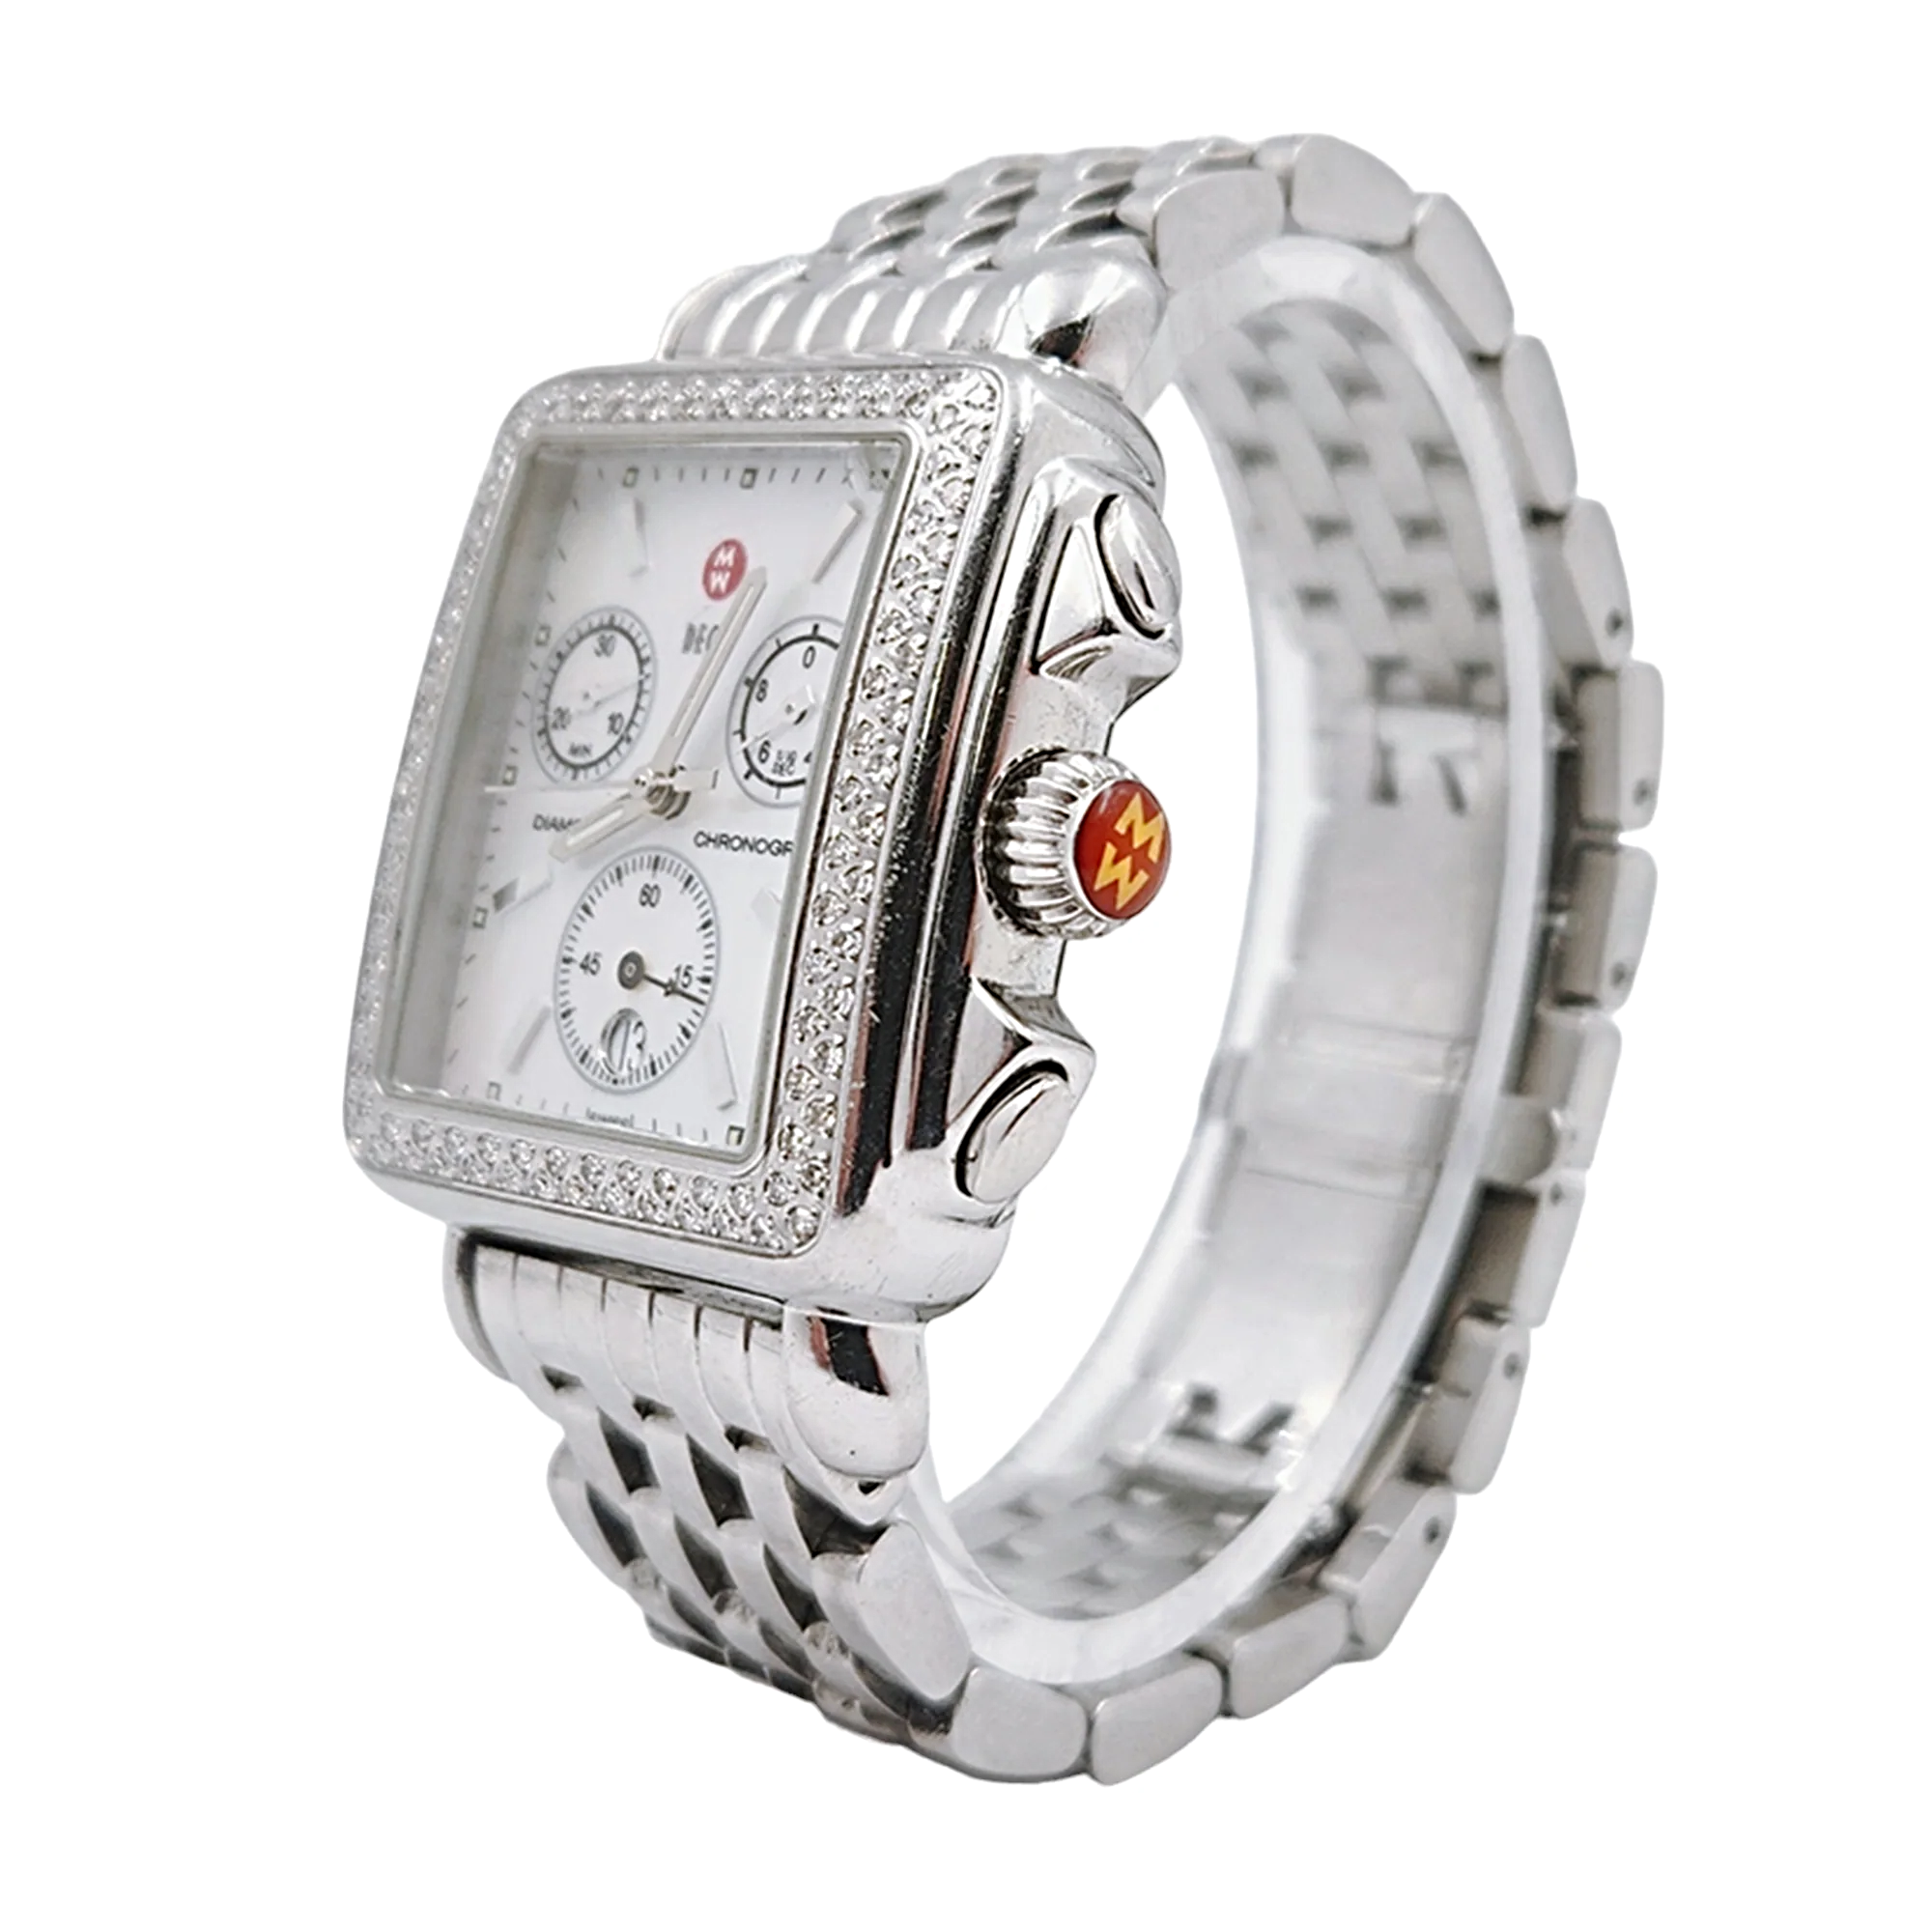 Ladies Michele Deco 33mm Stainless Steel Watch with Mother of Pearl Chronograph Dial and Diamond Bezel. (Pre-Owned MW06A01)